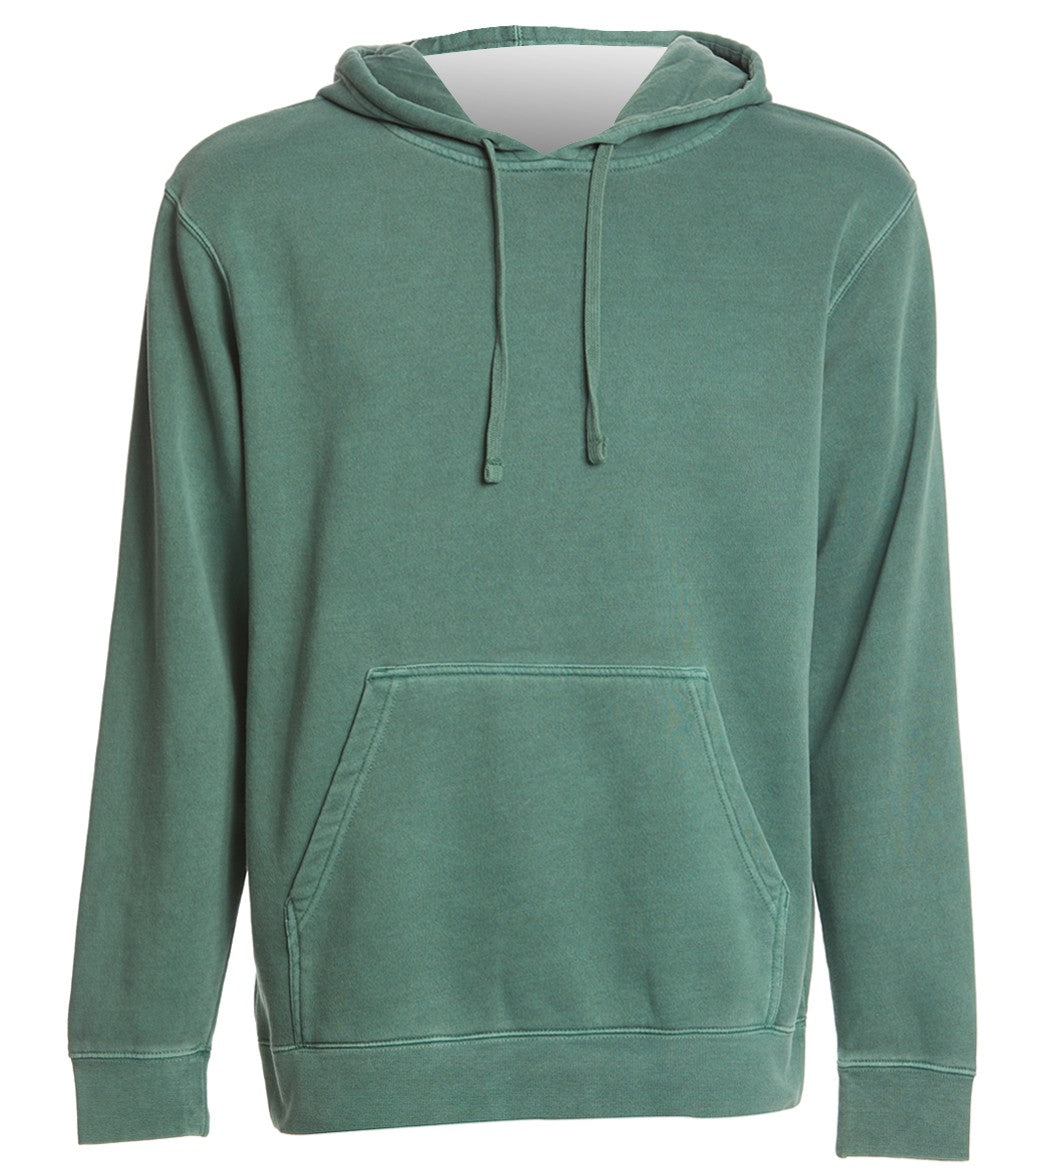 Men's Midweight Pigment Dyed Hooded Sweatshirt - Alpine Green Large Cotton/Polyester - Swimoutlet.com